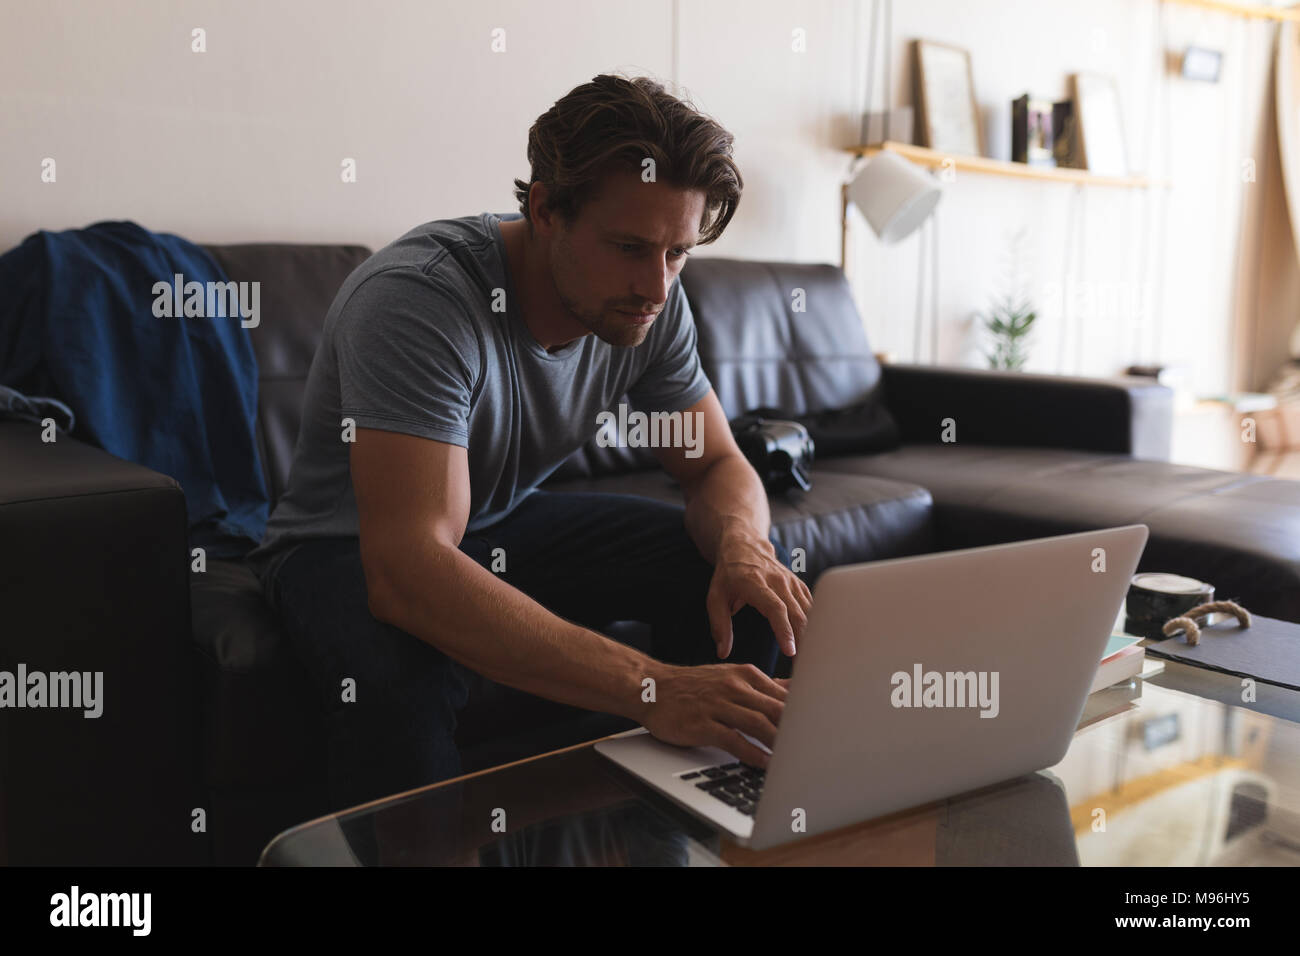 Man using laptop in living room Stock Photo